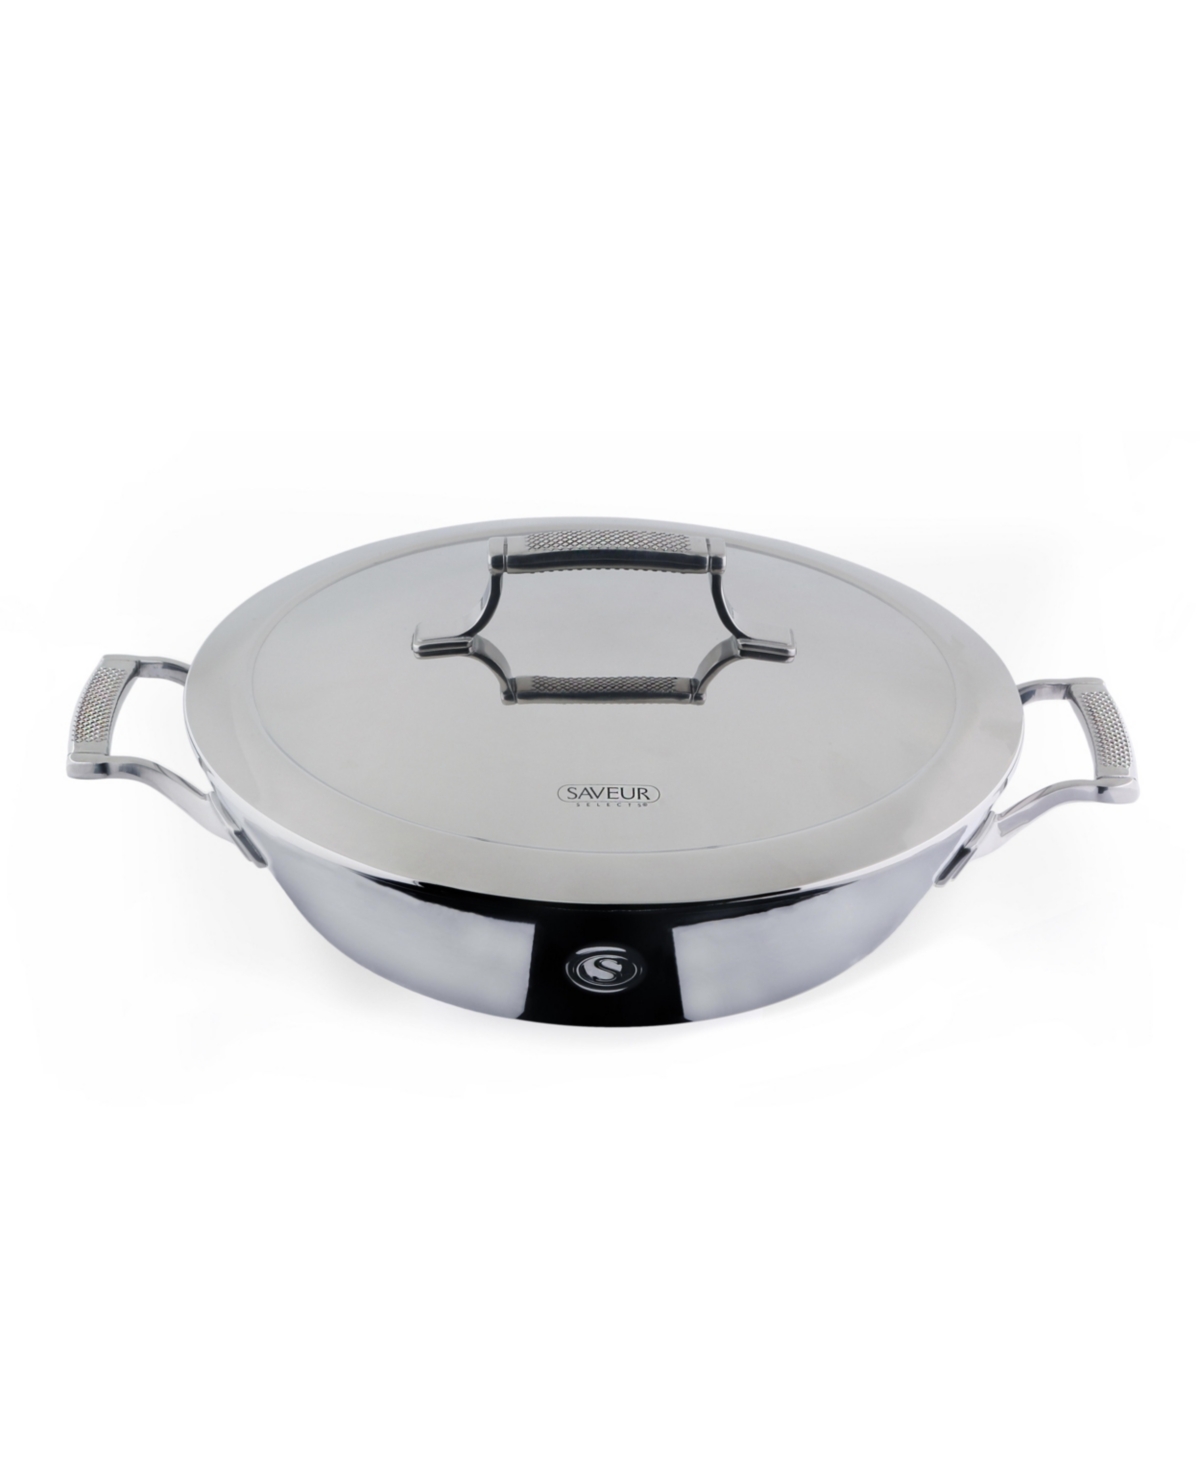 Saveur Selects Voyage Series Tri-ply Stainless Steel 12" Pan With Lid In Silver